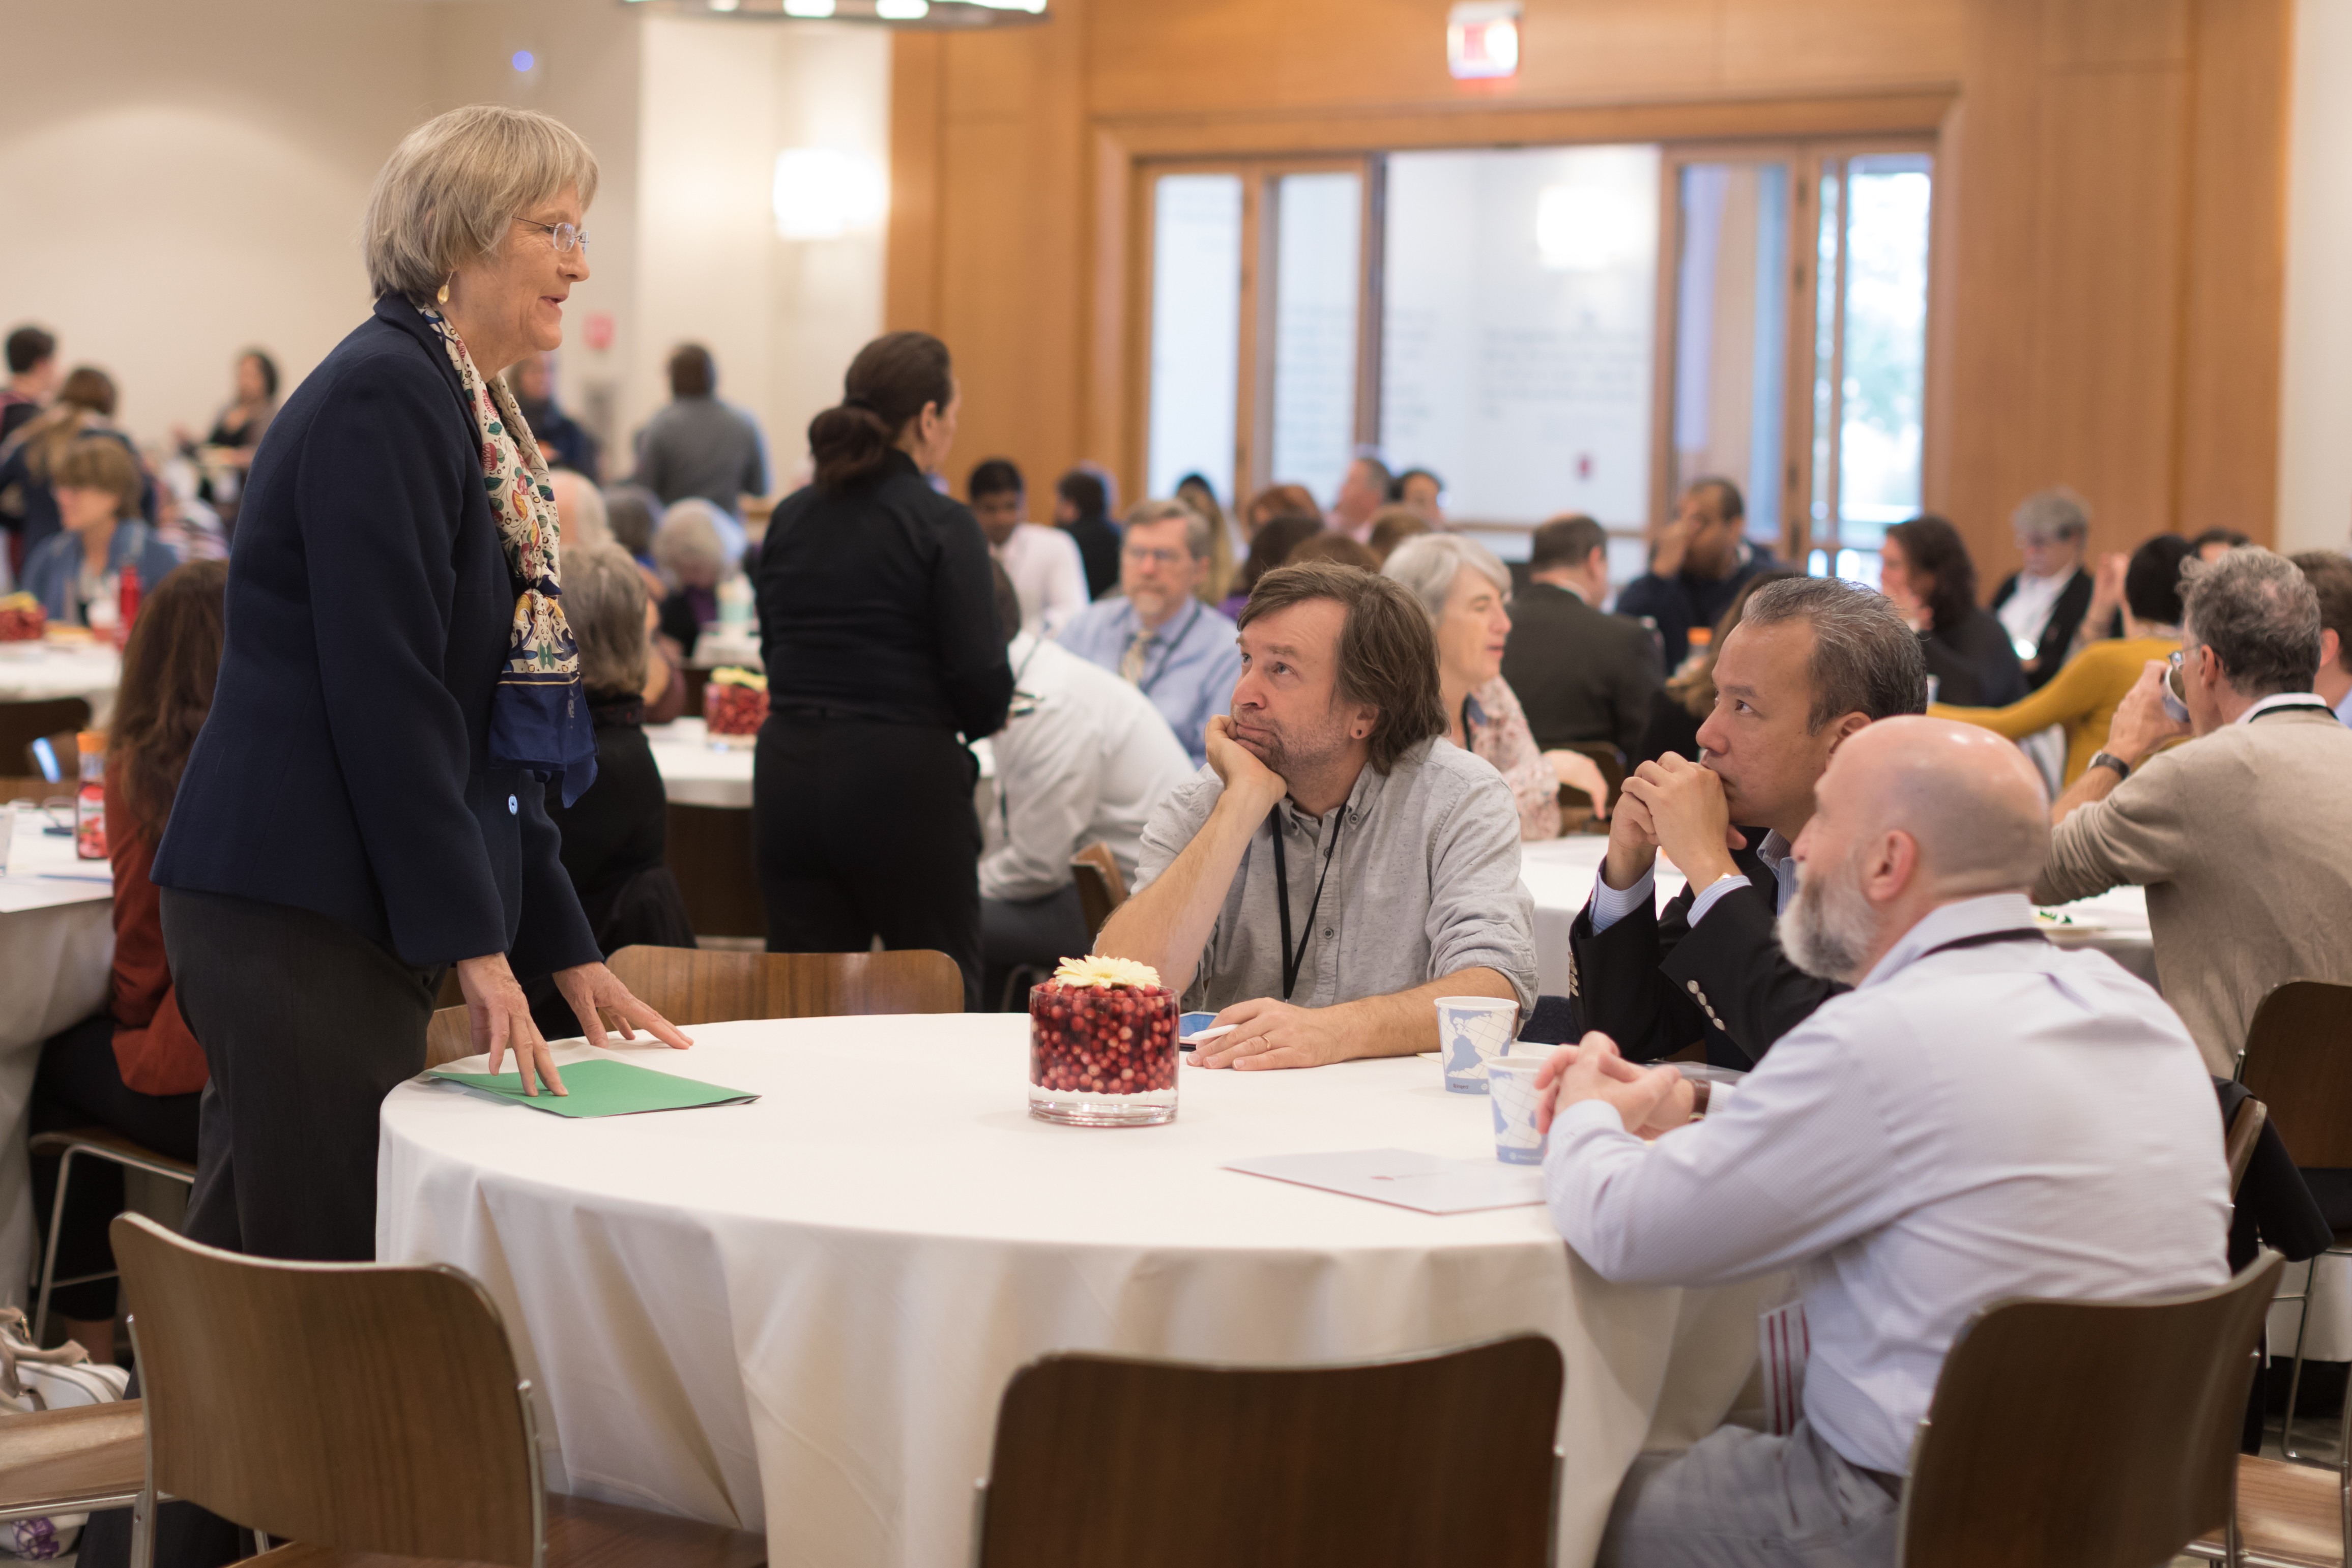 President Drew Faust speaks engages with some faculty members prior to taking the stage to provide welcome remarks to conference attendees